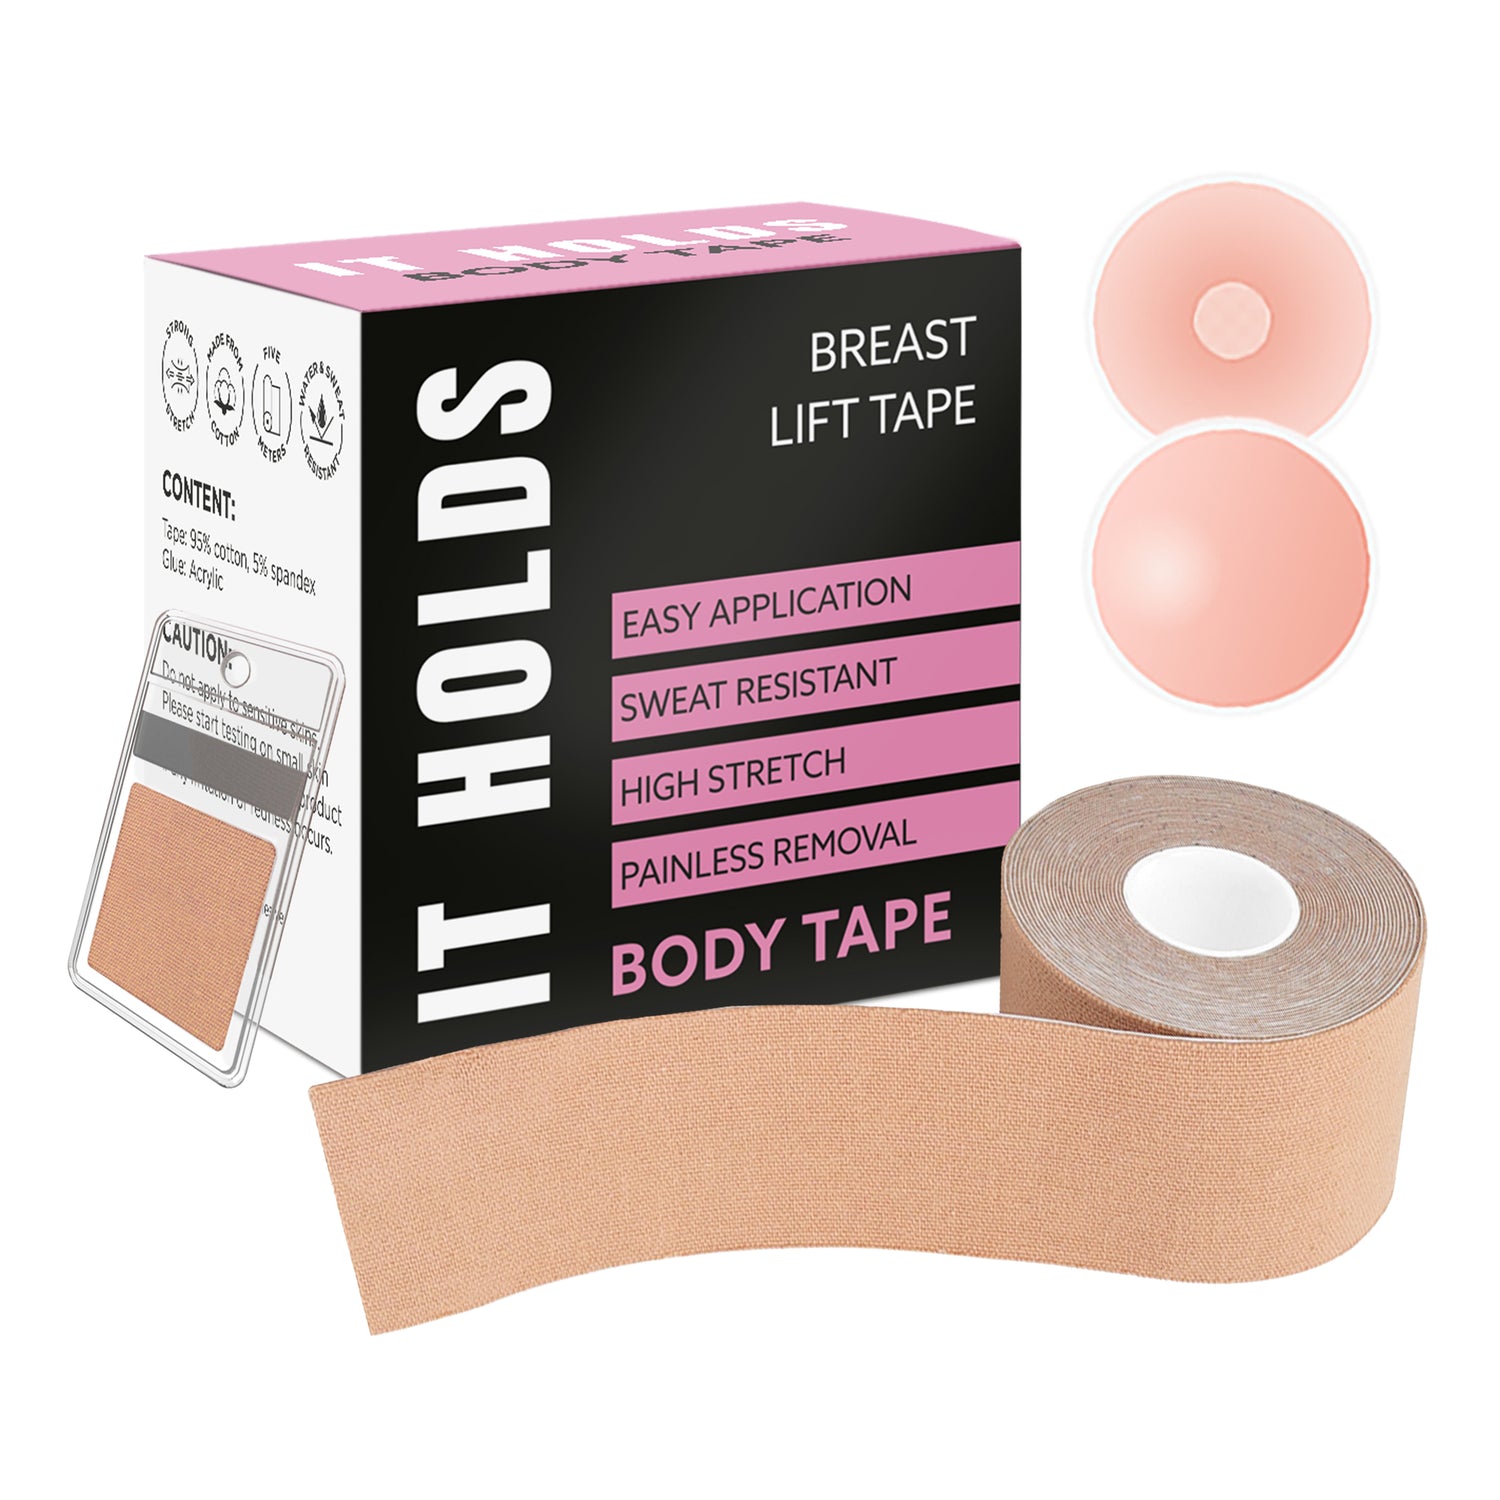 Cindy's Tape Boob Tape Nude Plus for D Cup up Size for Large Size DIY Boob  Lift Job Body Tape Breast Lift TapeBra TapeFoot TapeFabric Tape Medical  Grade and Waterproof. Kim K's